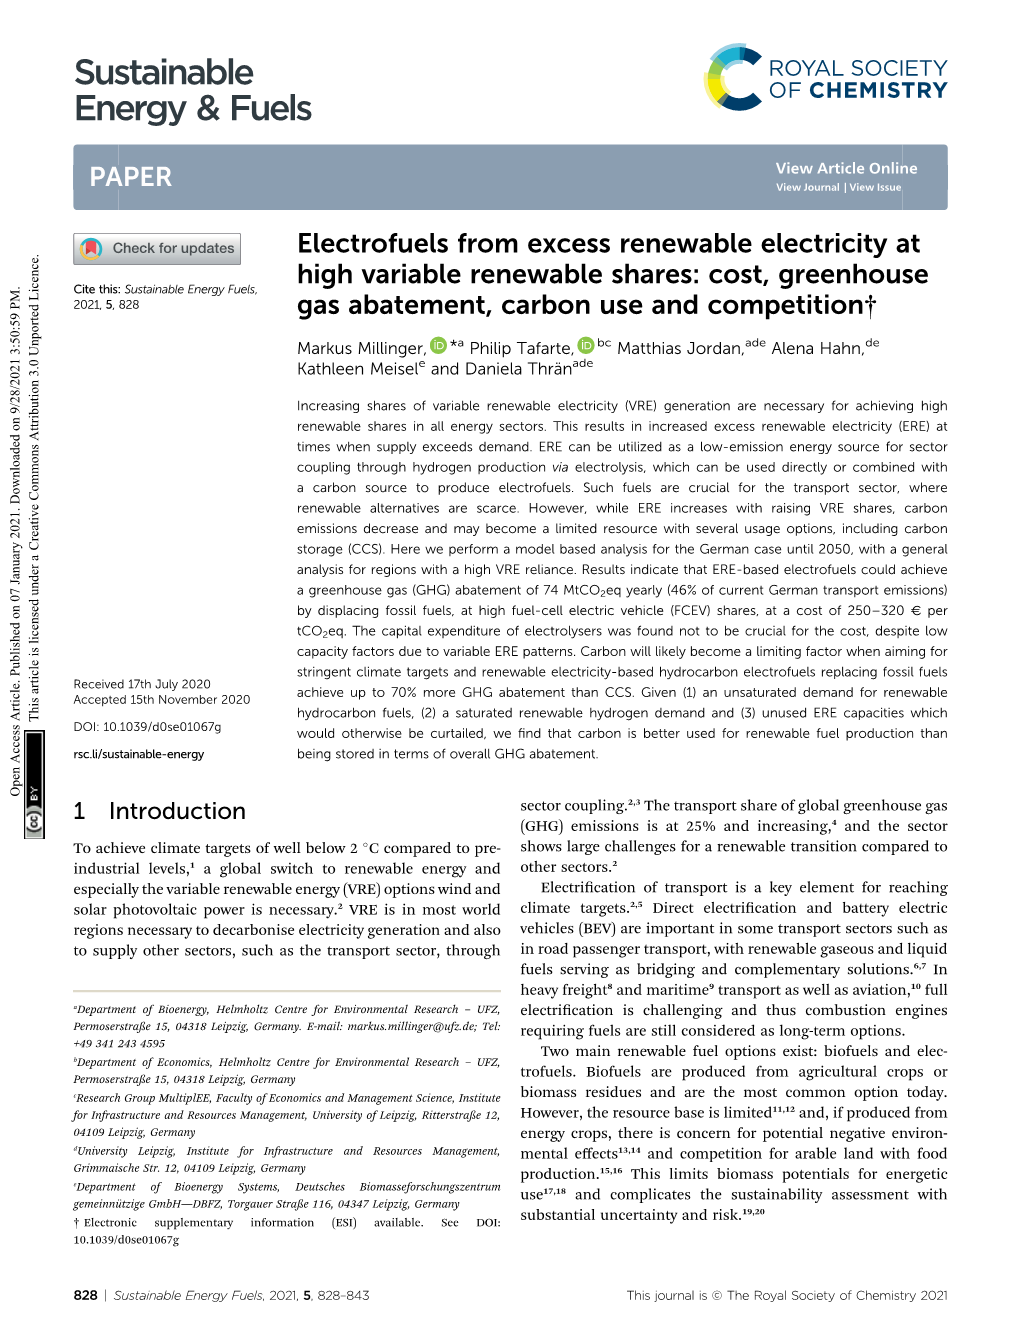 Electrofuels from Excess Renewable Electricity at High Variable